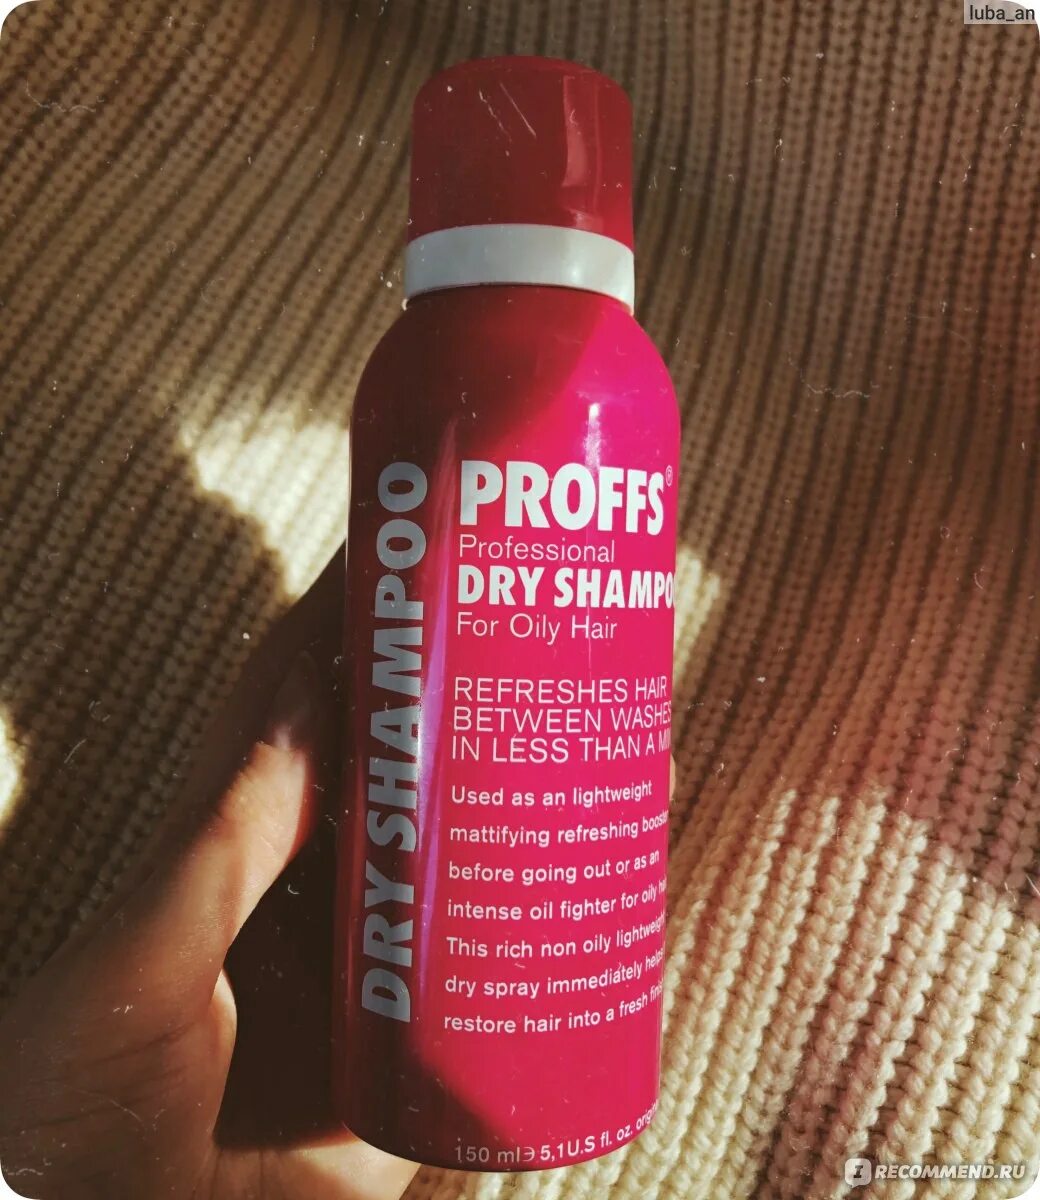 Proffs professional Dry Shampoo for oily hair. Сухой шампунь irecommend. Oriense Proff шампунь. Шампунь покраска волос irecommend.